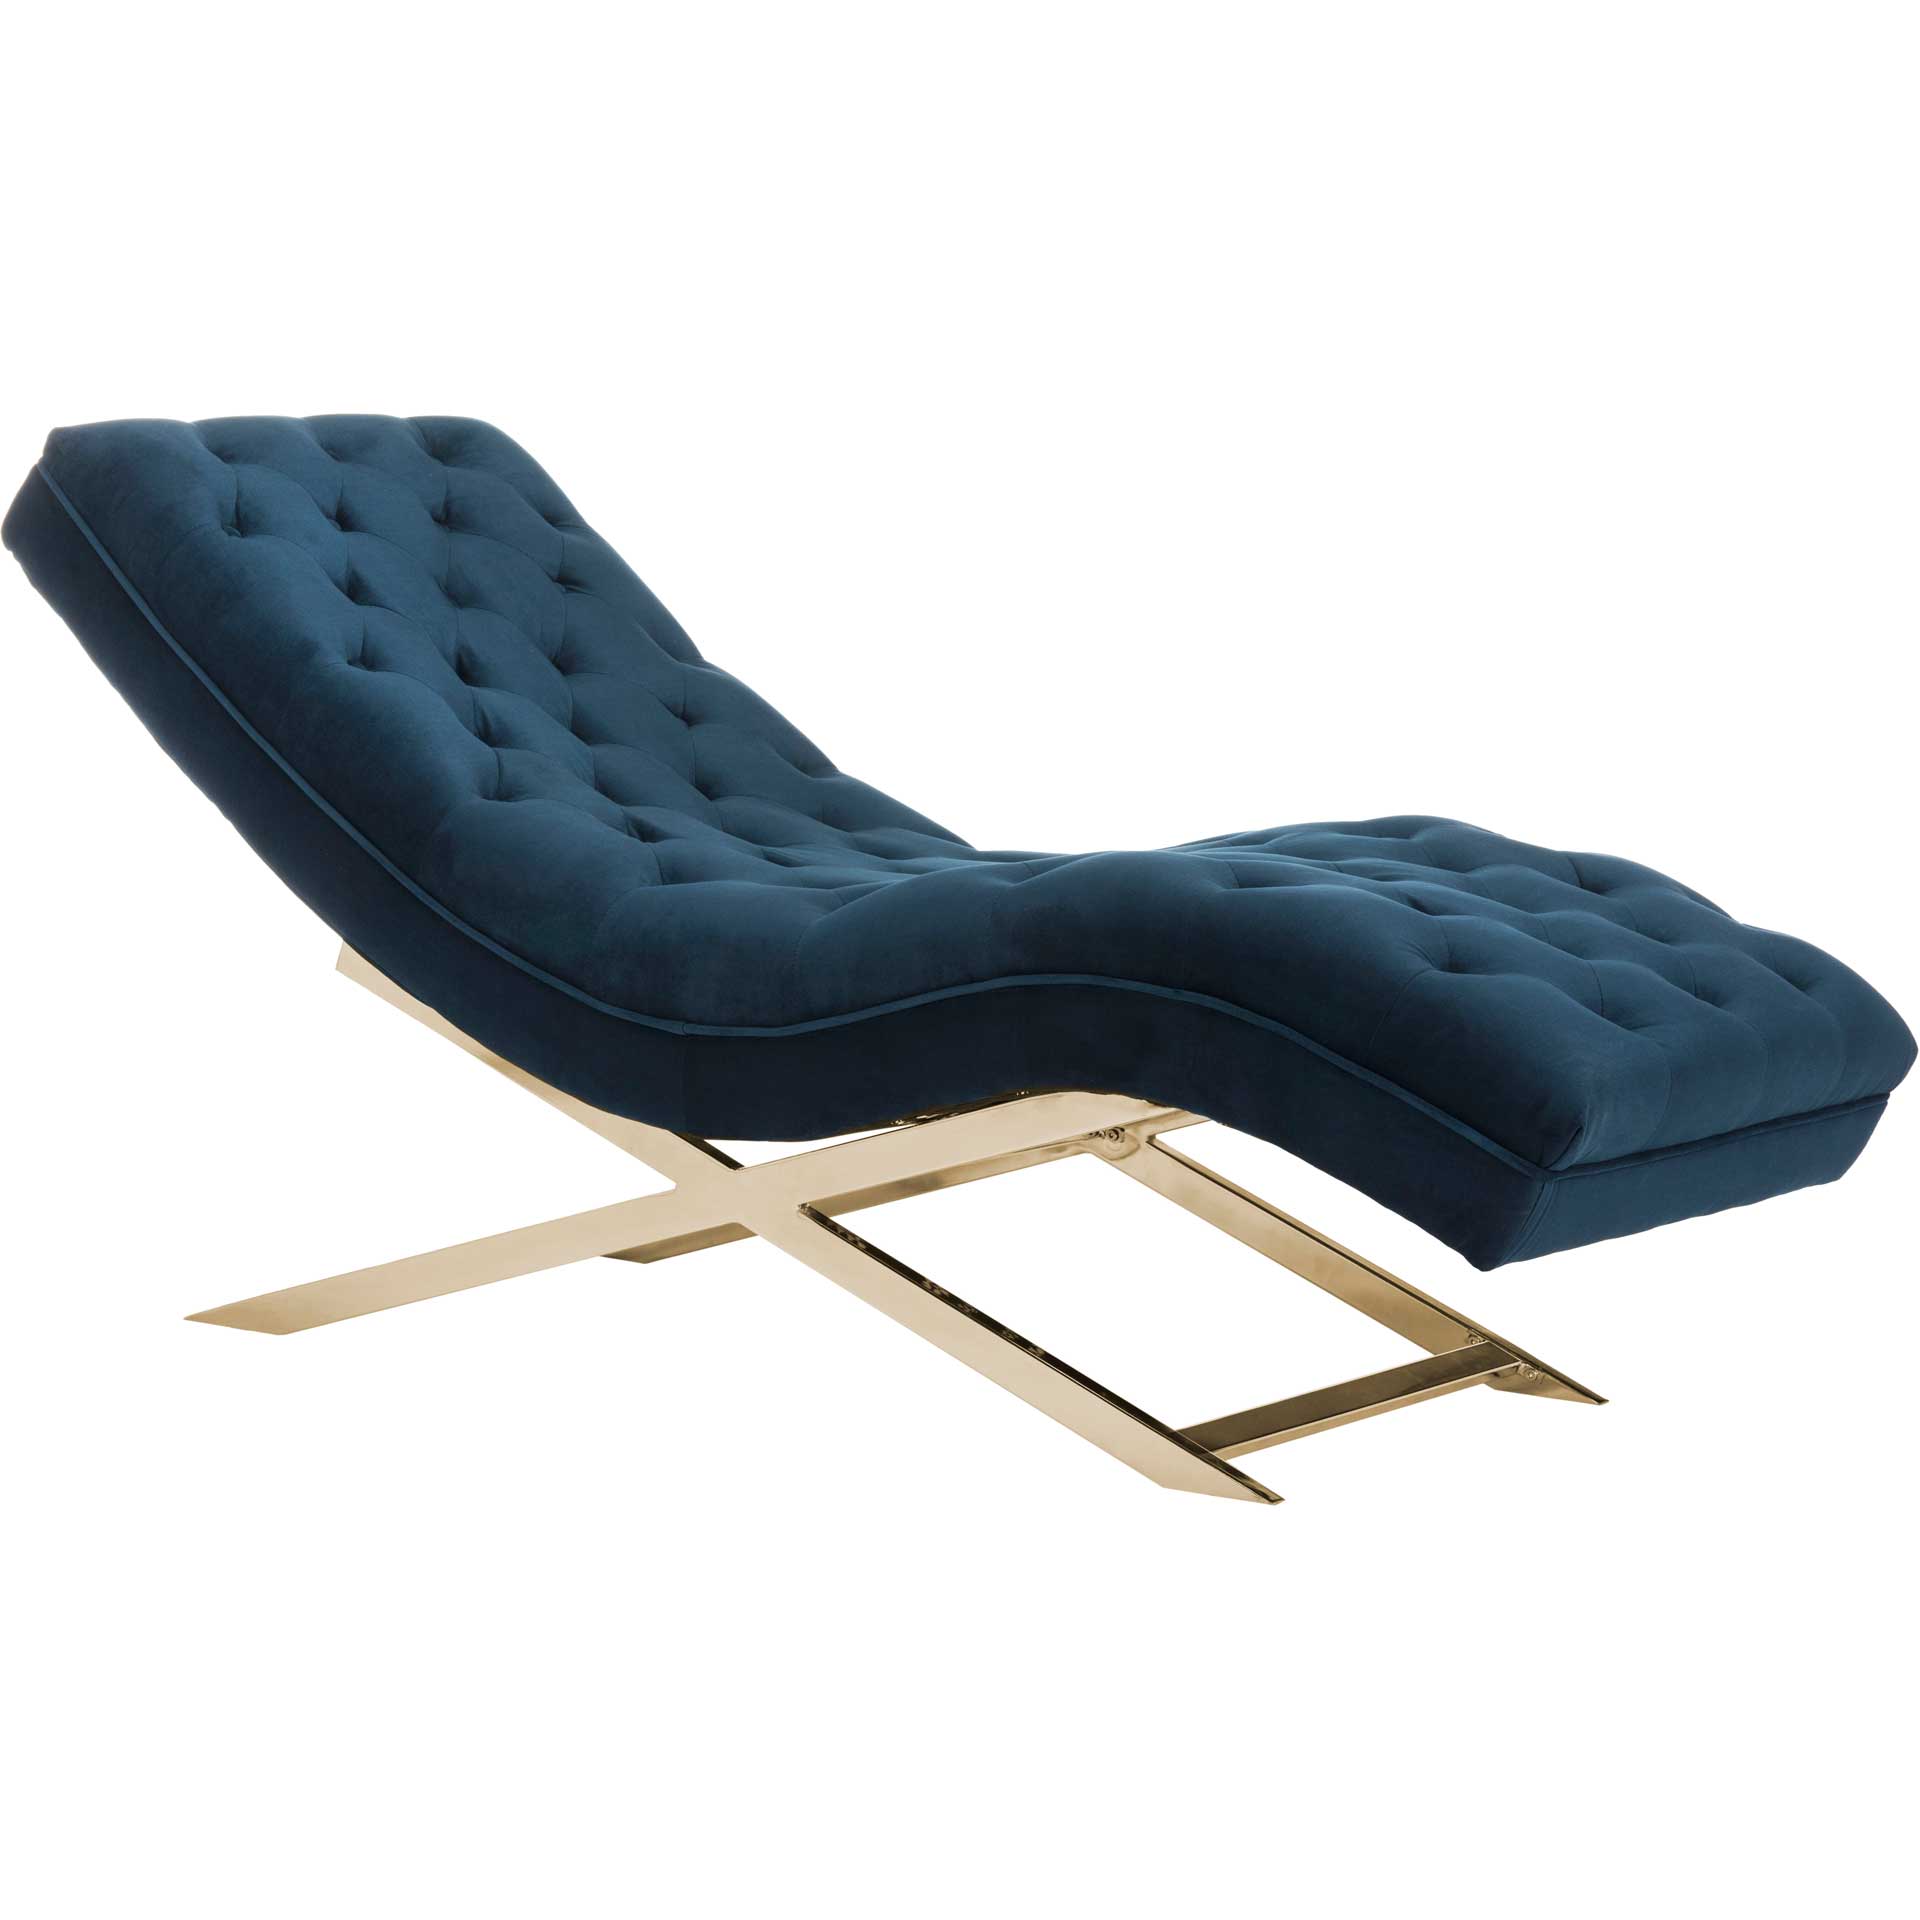 Morph Chaise With Headrest Pillow Navy/Gold